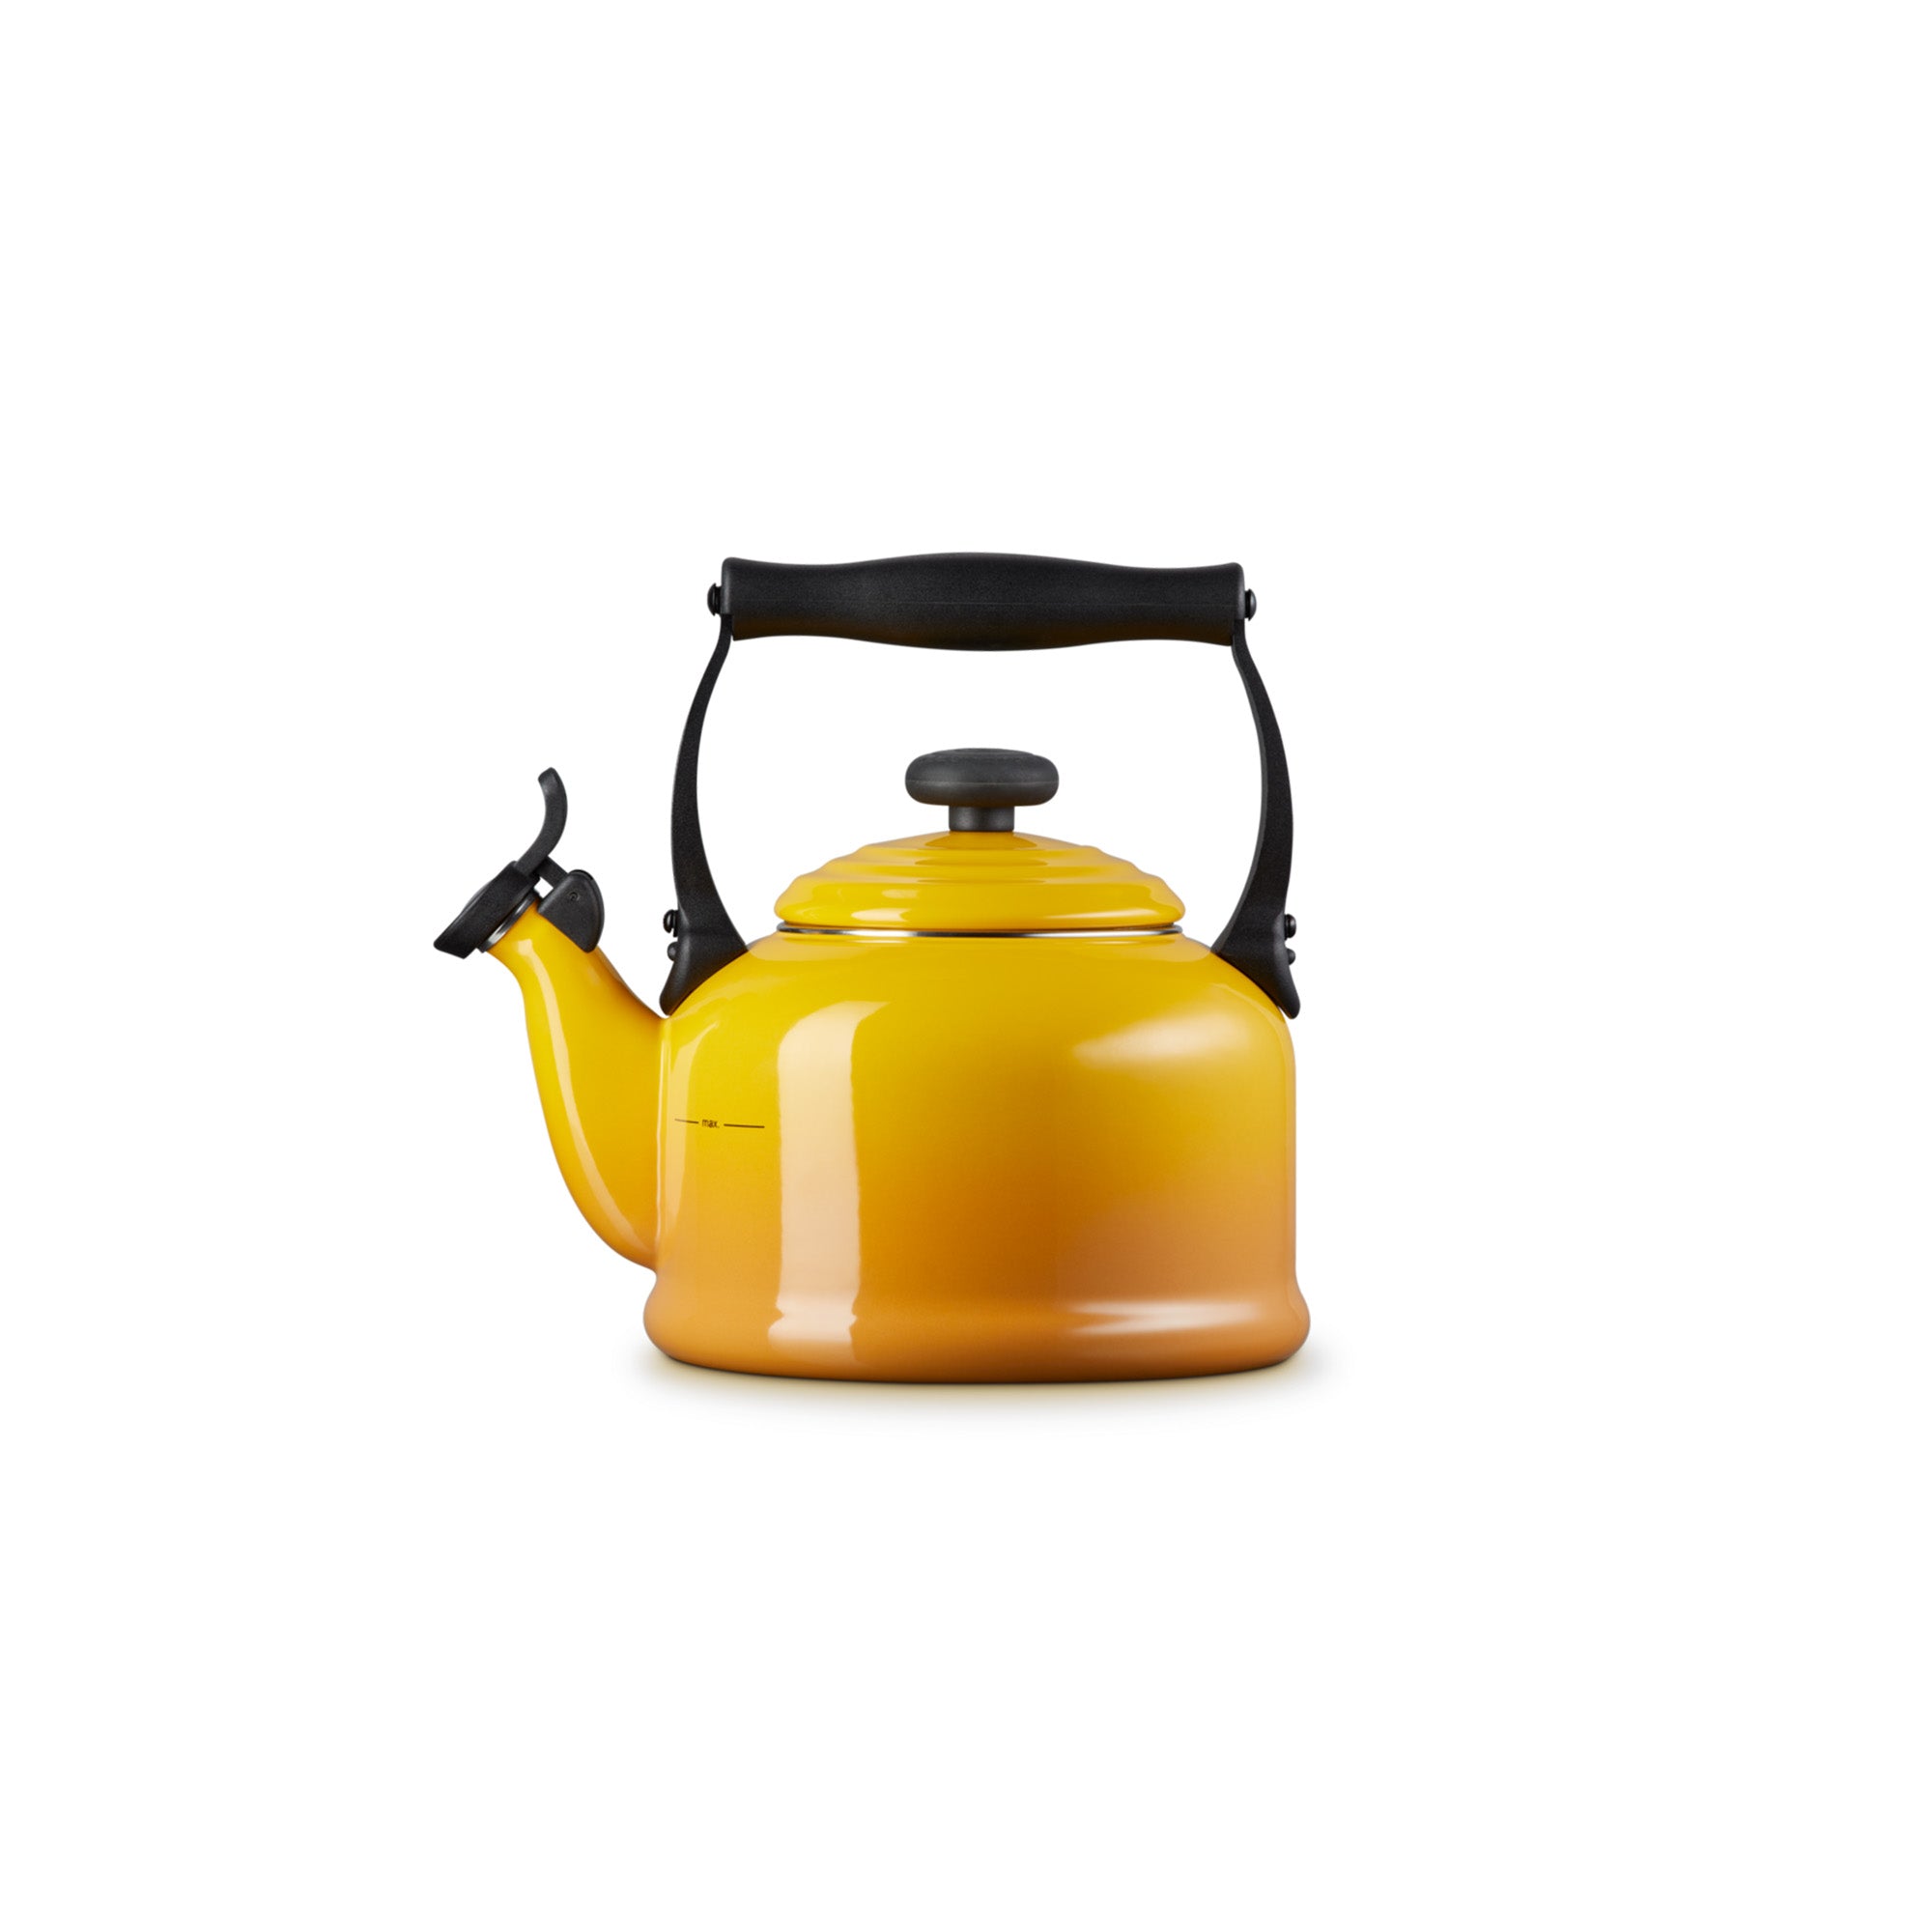 Le Creuset Nectar Traditional Kettle 2.1Ltr